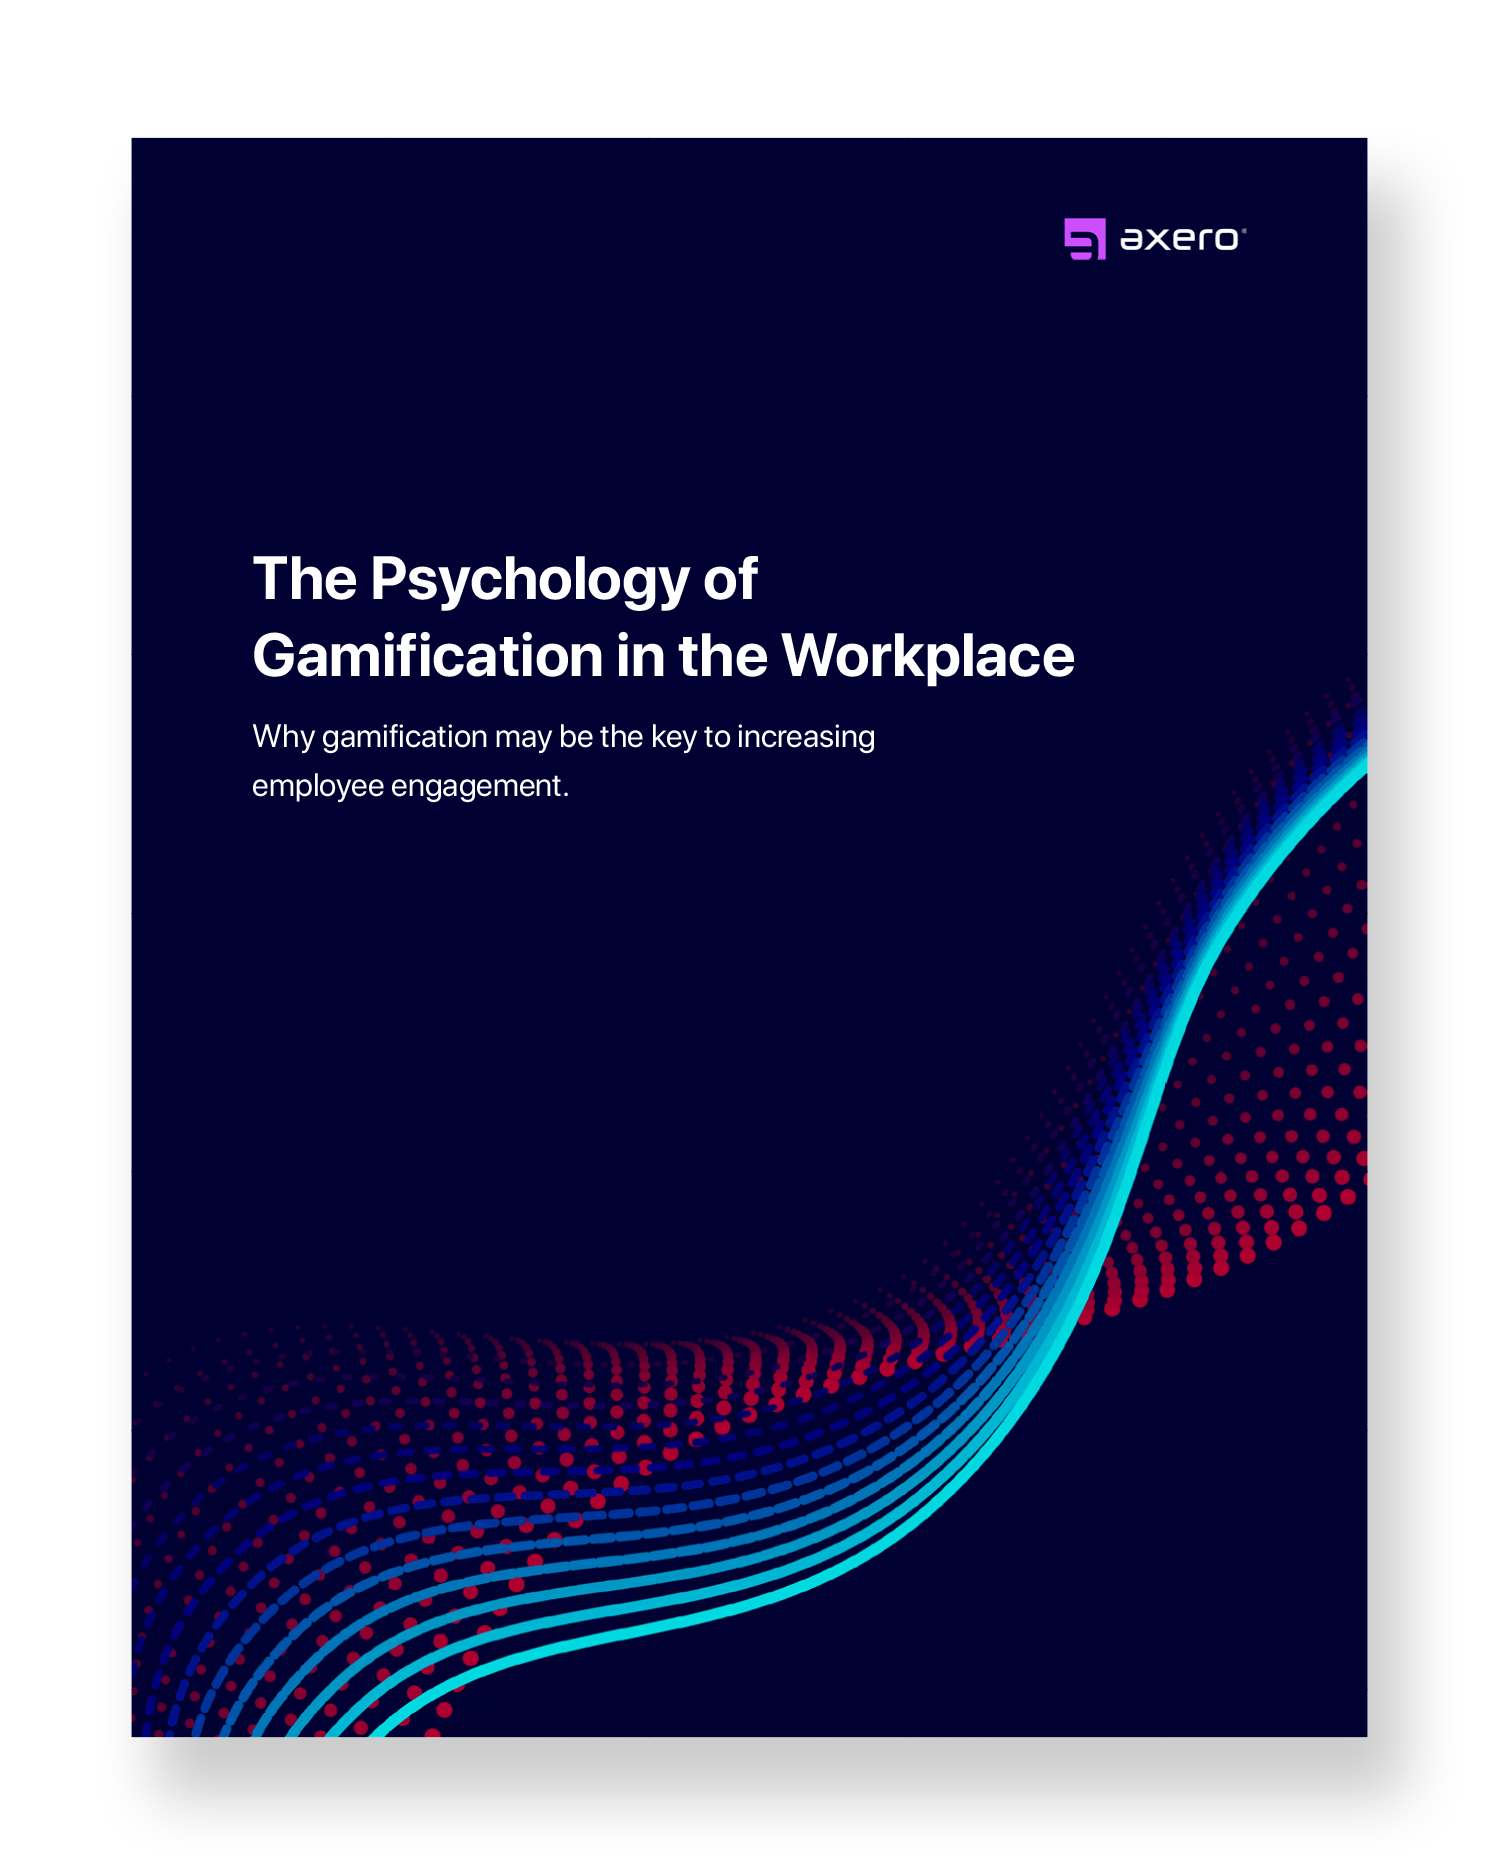 gamification-in-the-workplace